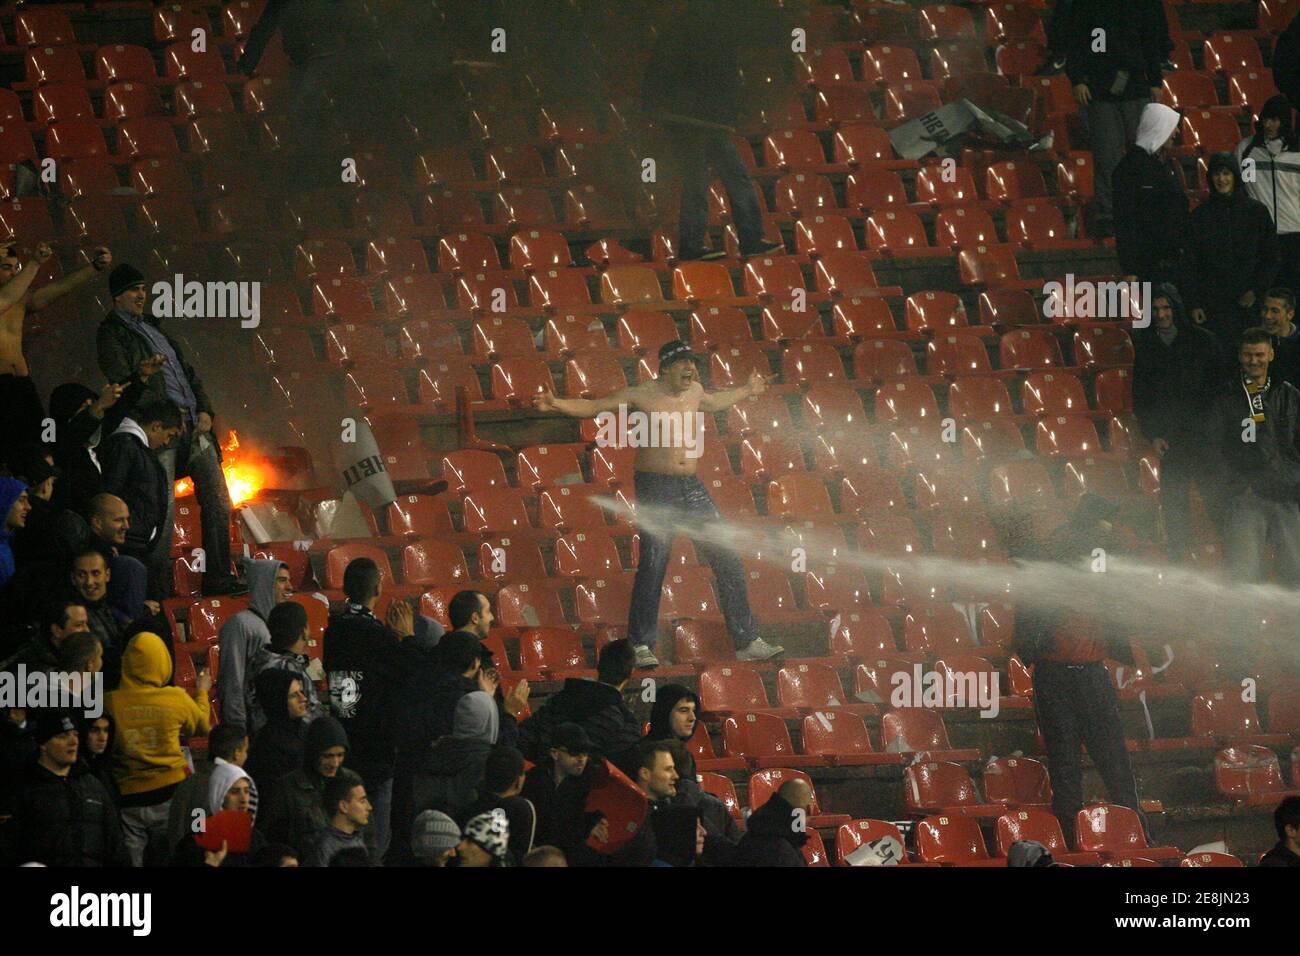 Firefighters work to extinguish fires burning in the stands during a Serbian first division soccer match between Red Star and Partizan in Belgrade November 28, 2009. Partizan won the match 2-1.  REUTERS/Ivan Milutinovic  (SERBIA SPORT SOCCER) Stock Photo